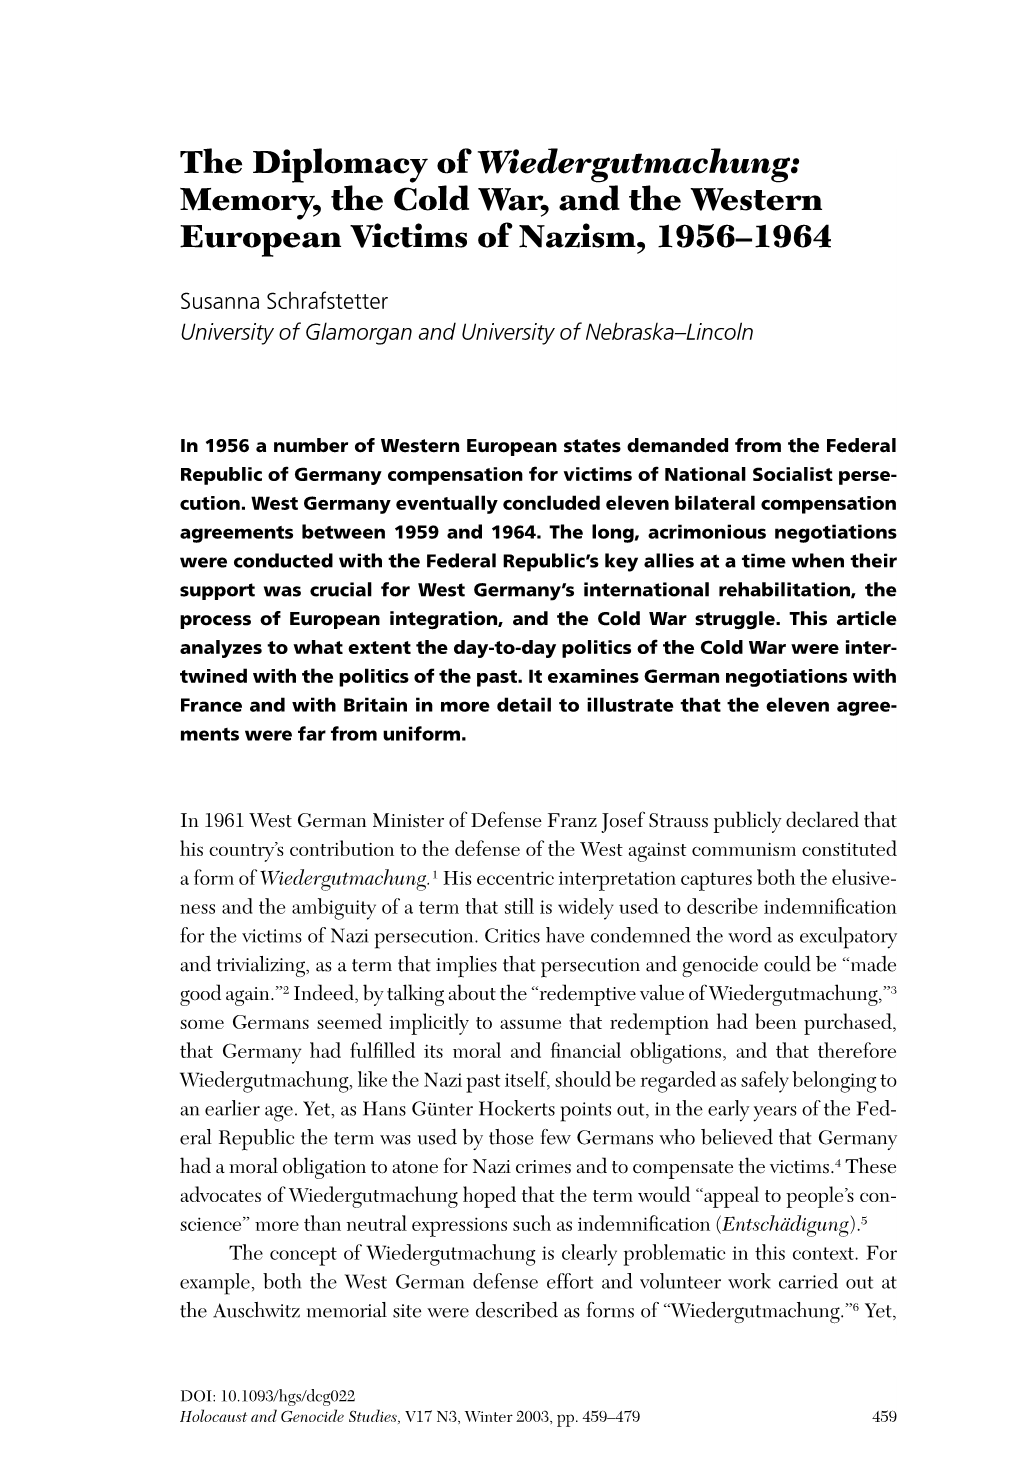 Wiedergutmachung: Memory, the Cold War, and the Western European Victims of Nazism, 1956–1964